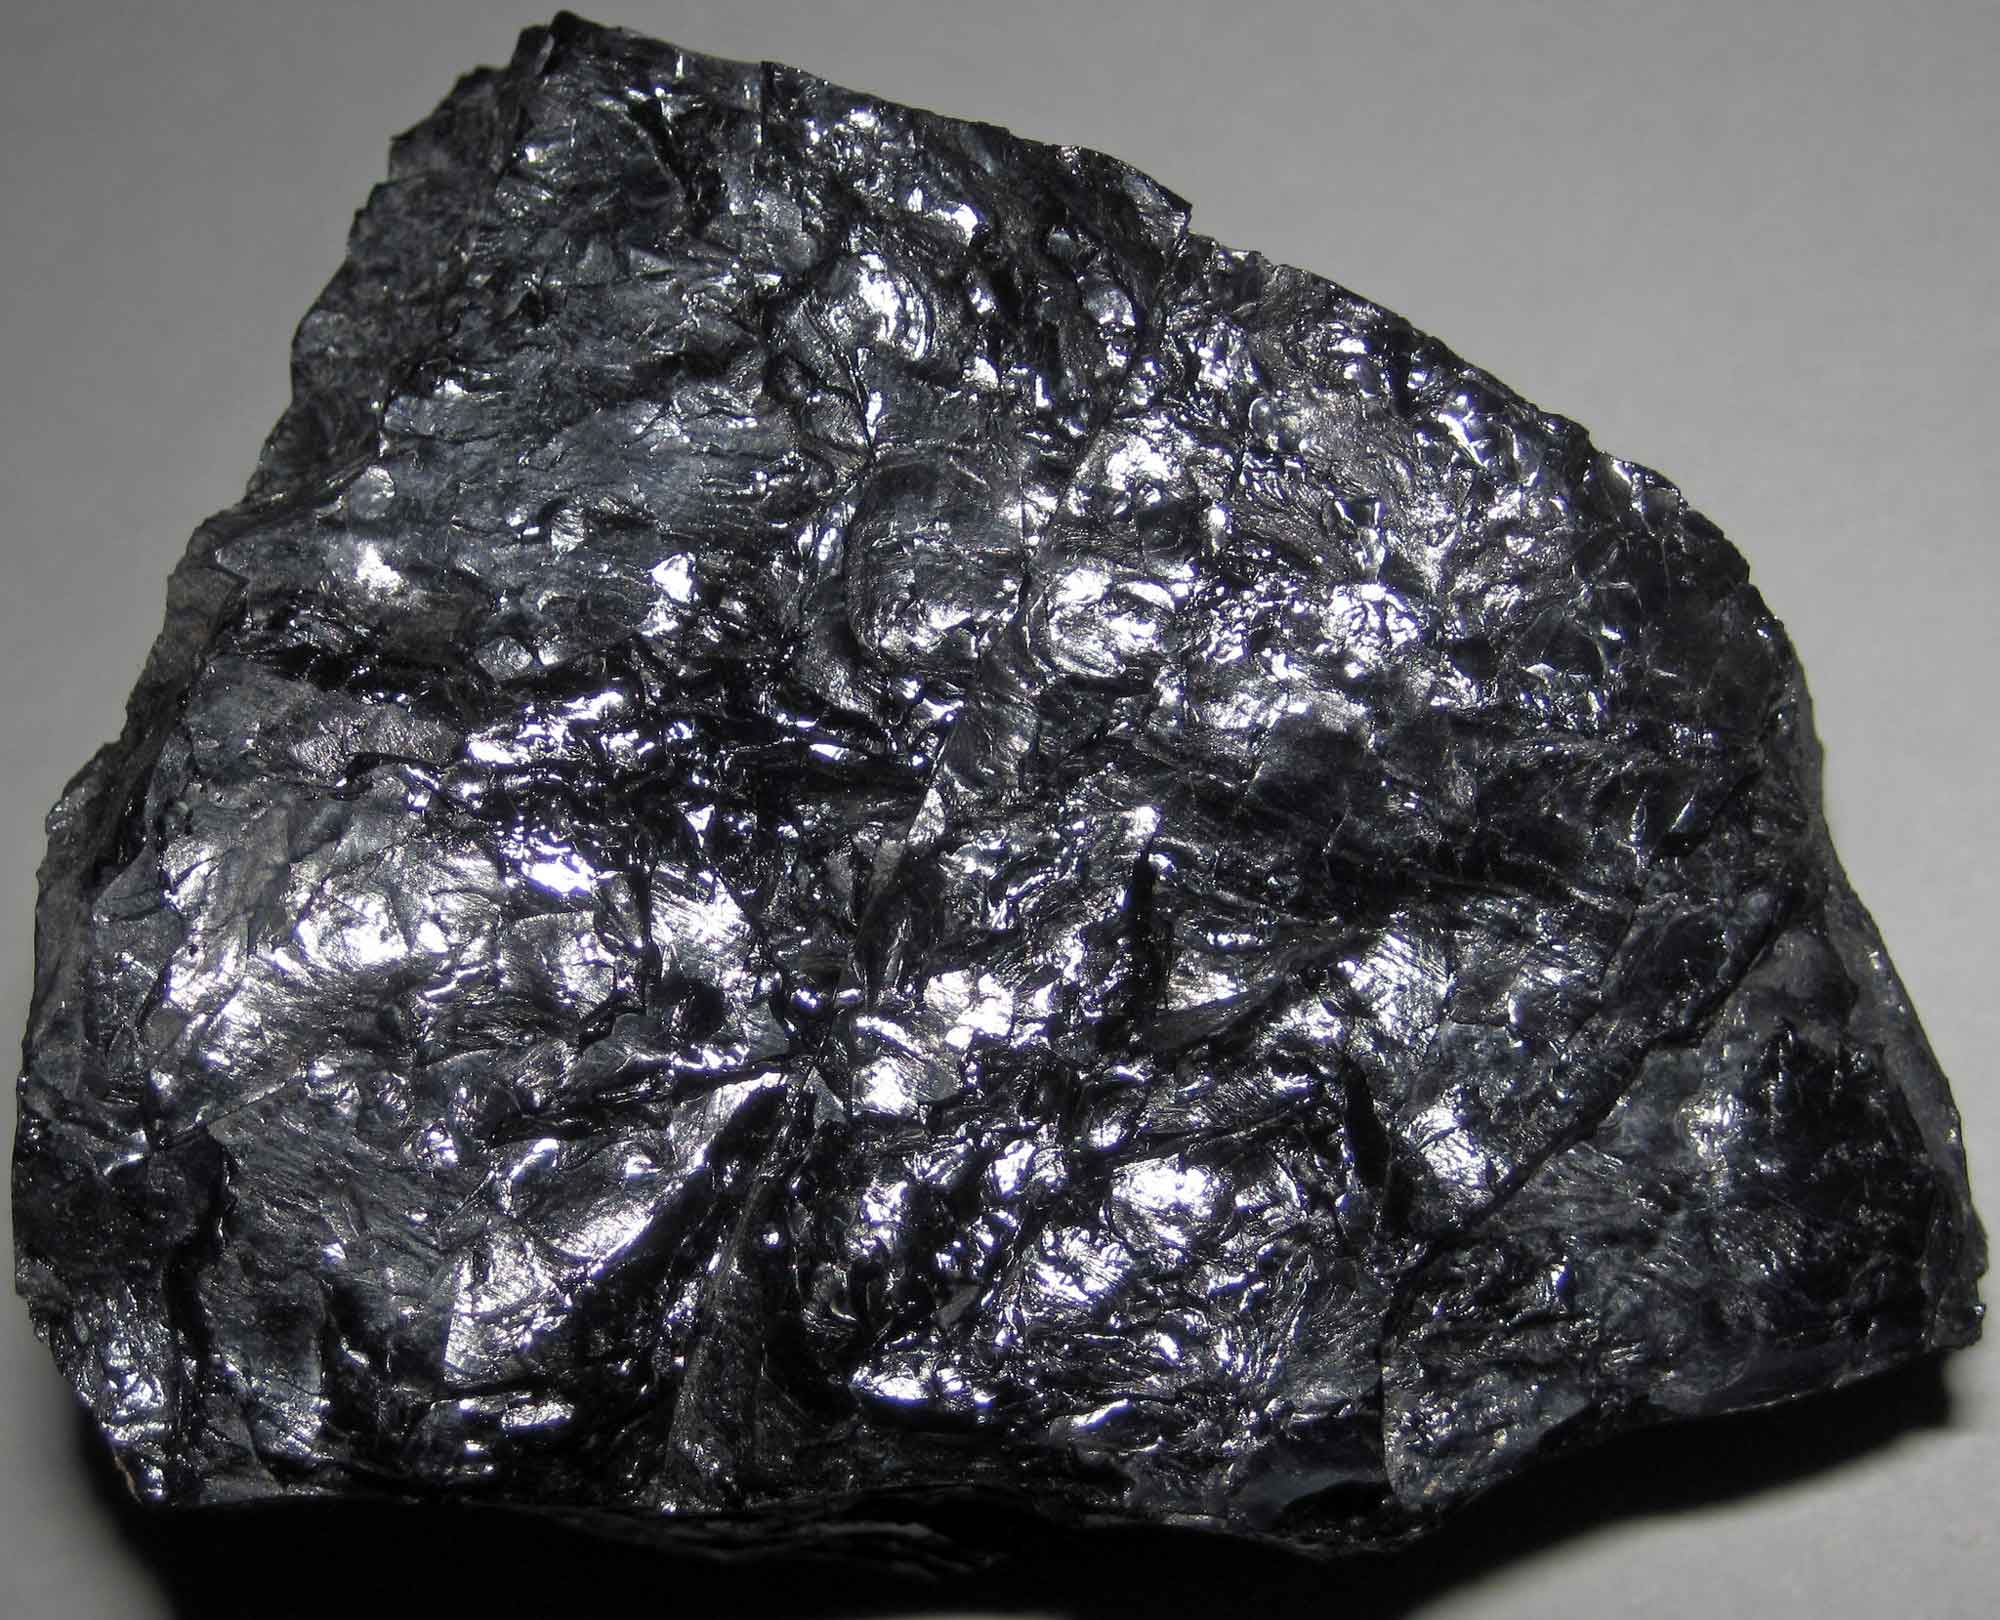 Photograph of a sample of coal from Kentucky.